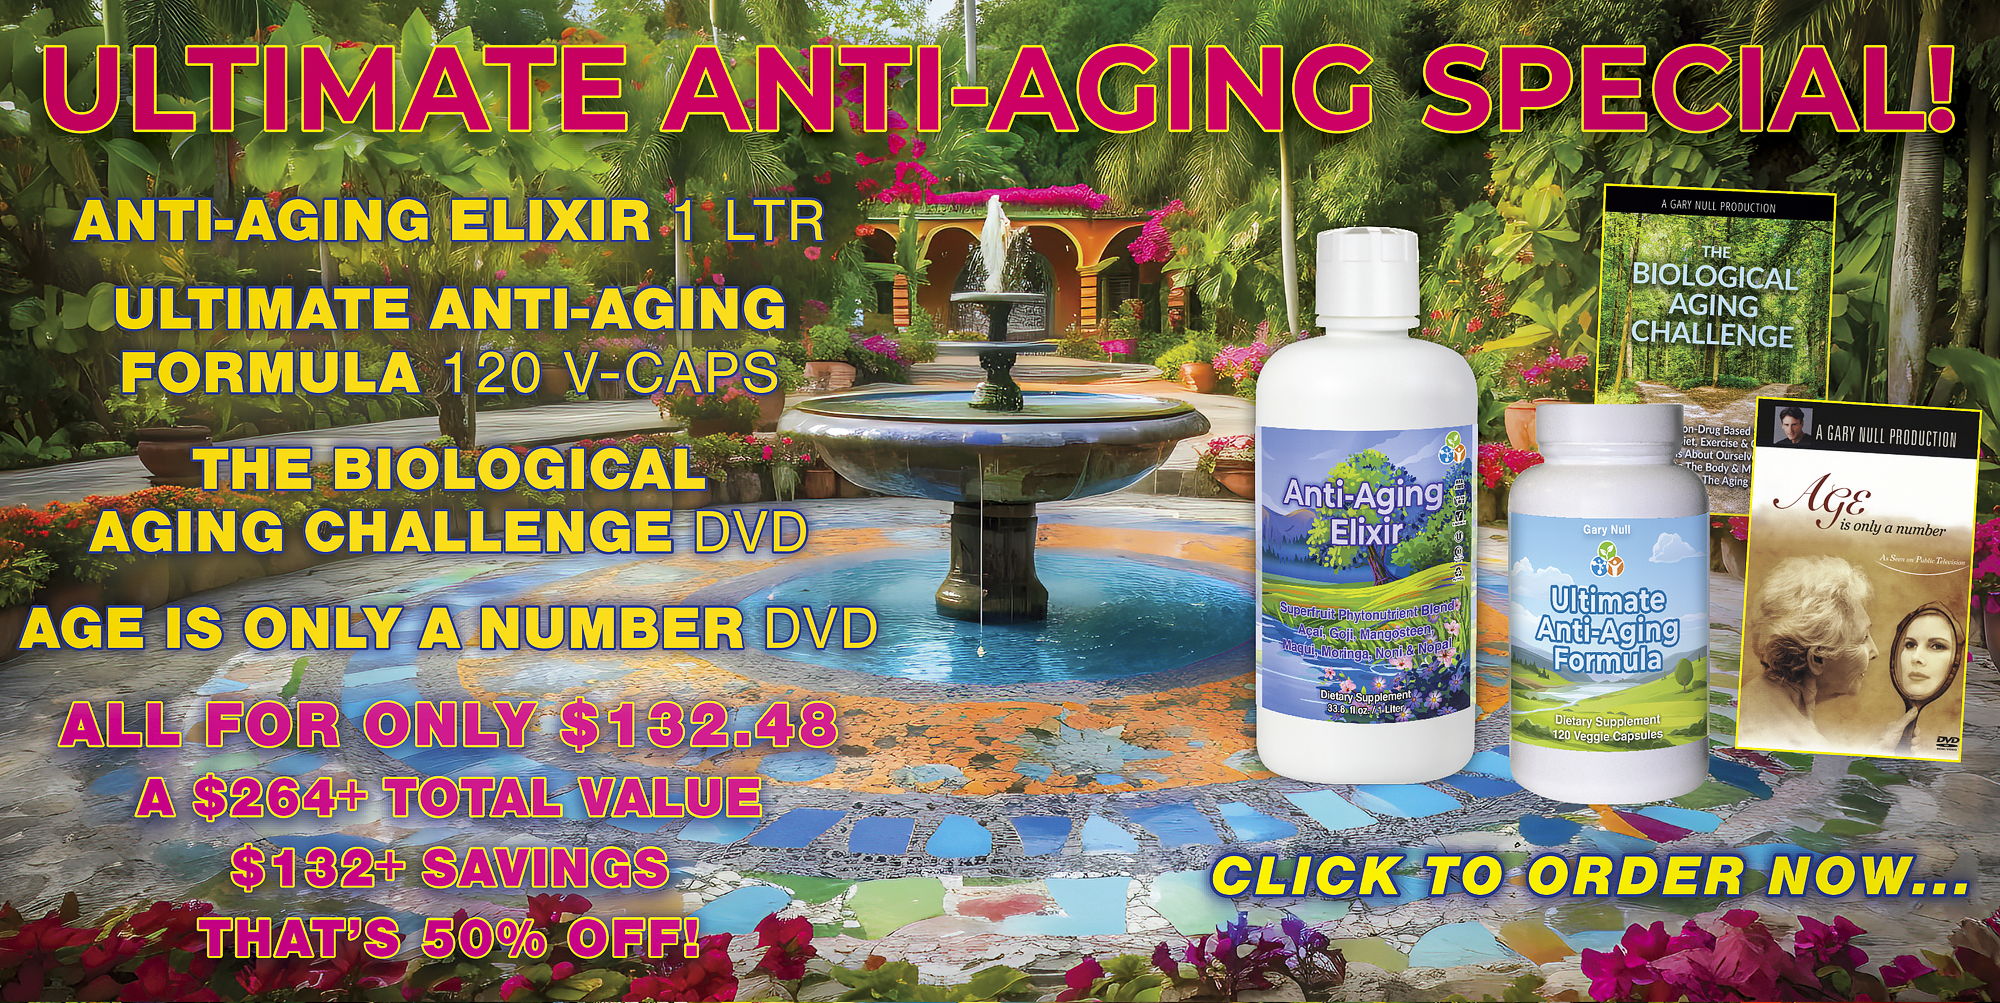 Ultimate Anti-Aging Special